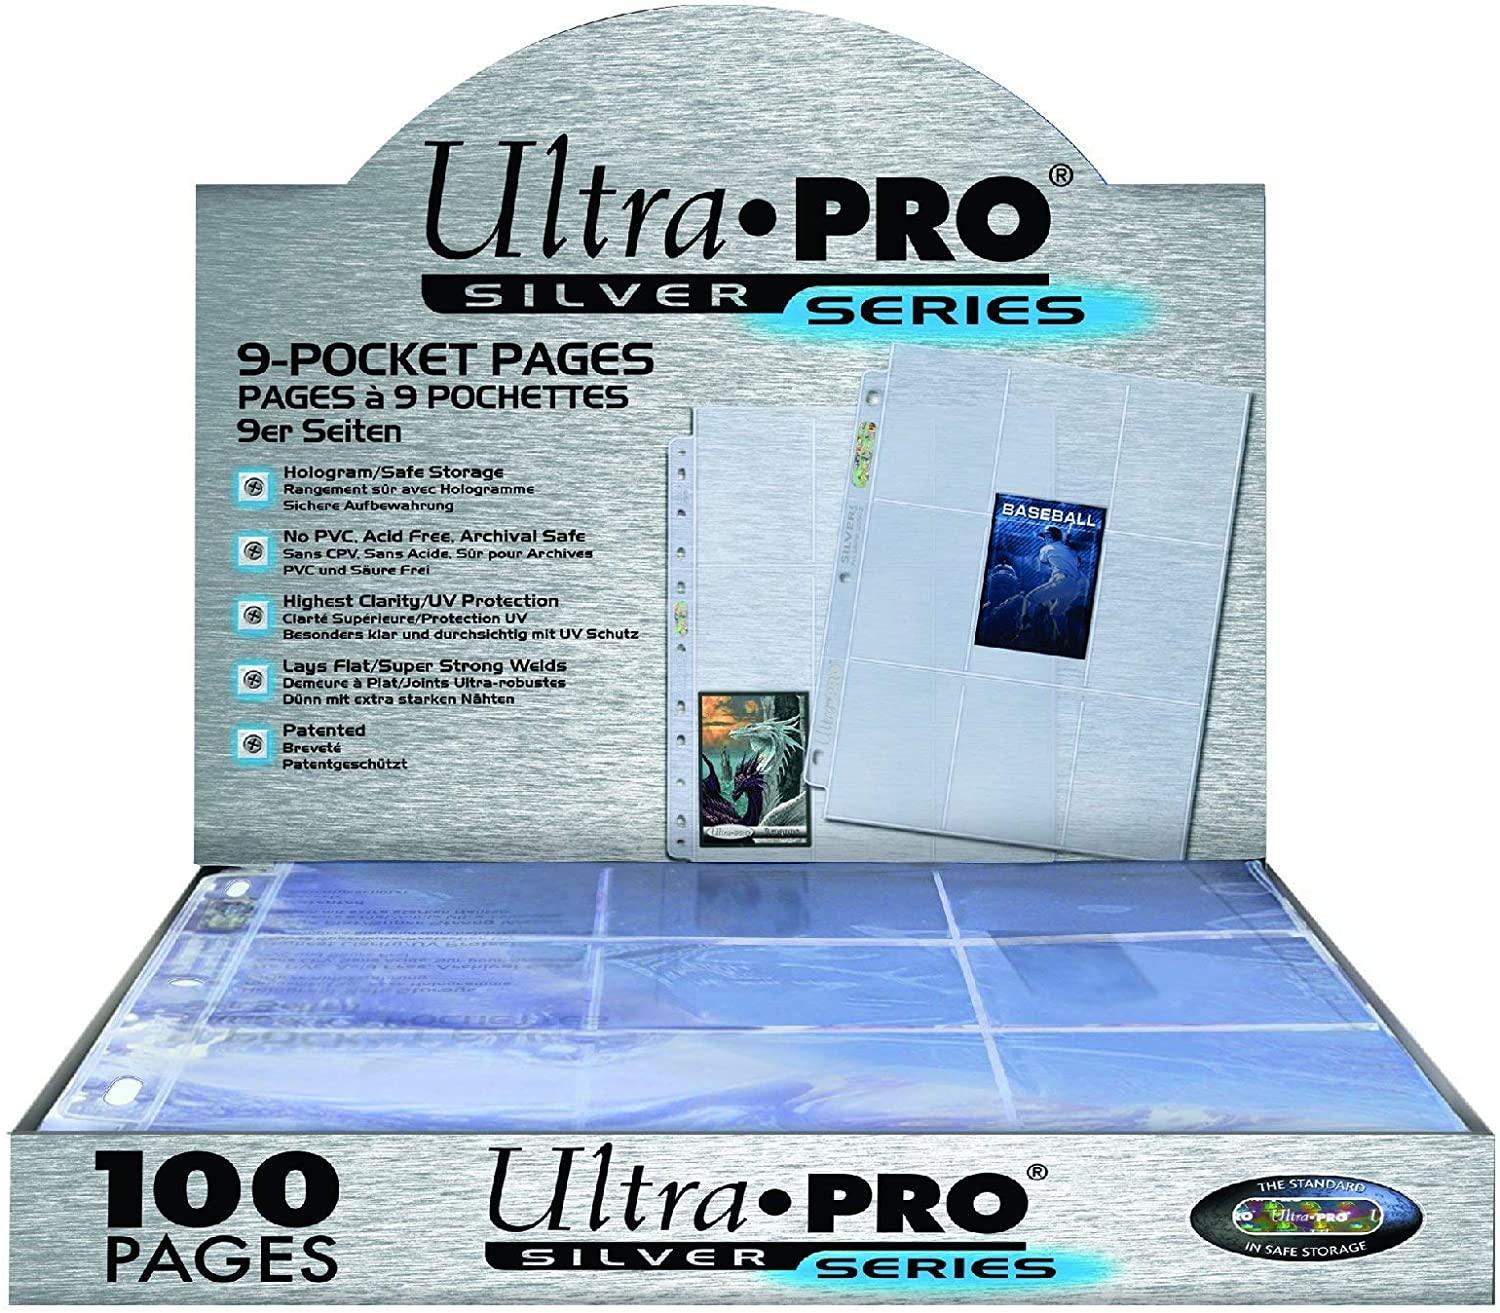 Ultra Pro - 9-Pocket Pages: Silver Series Display